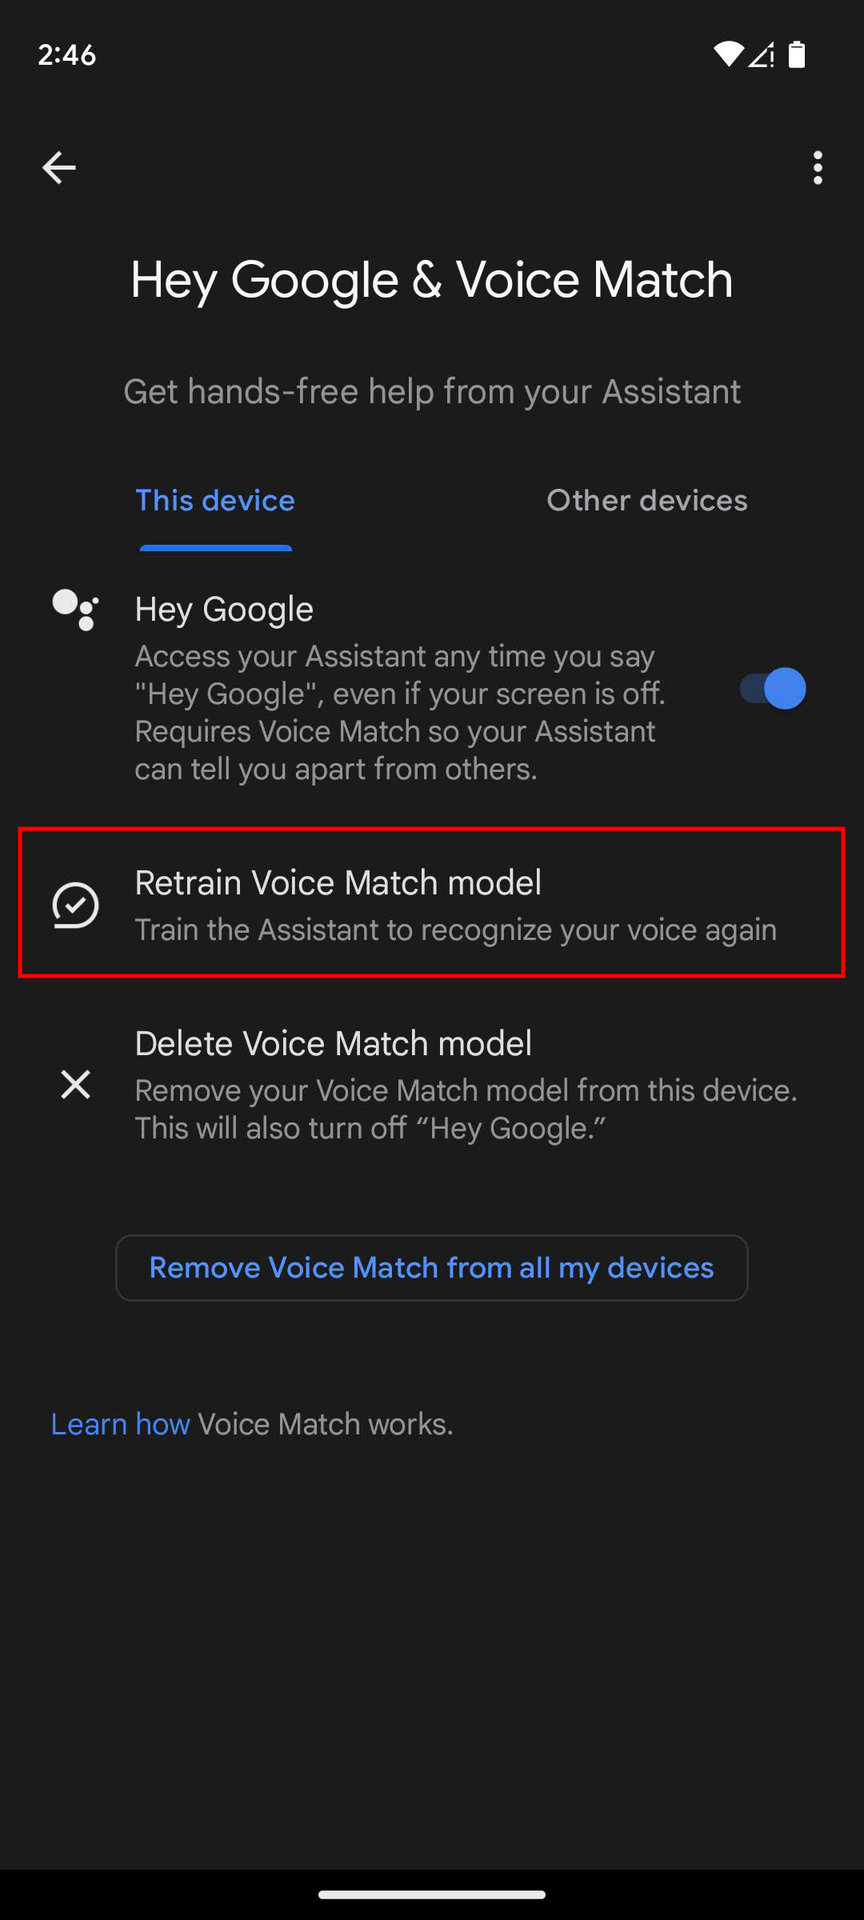 How to retrain Voice Model for Google Assistant (5)